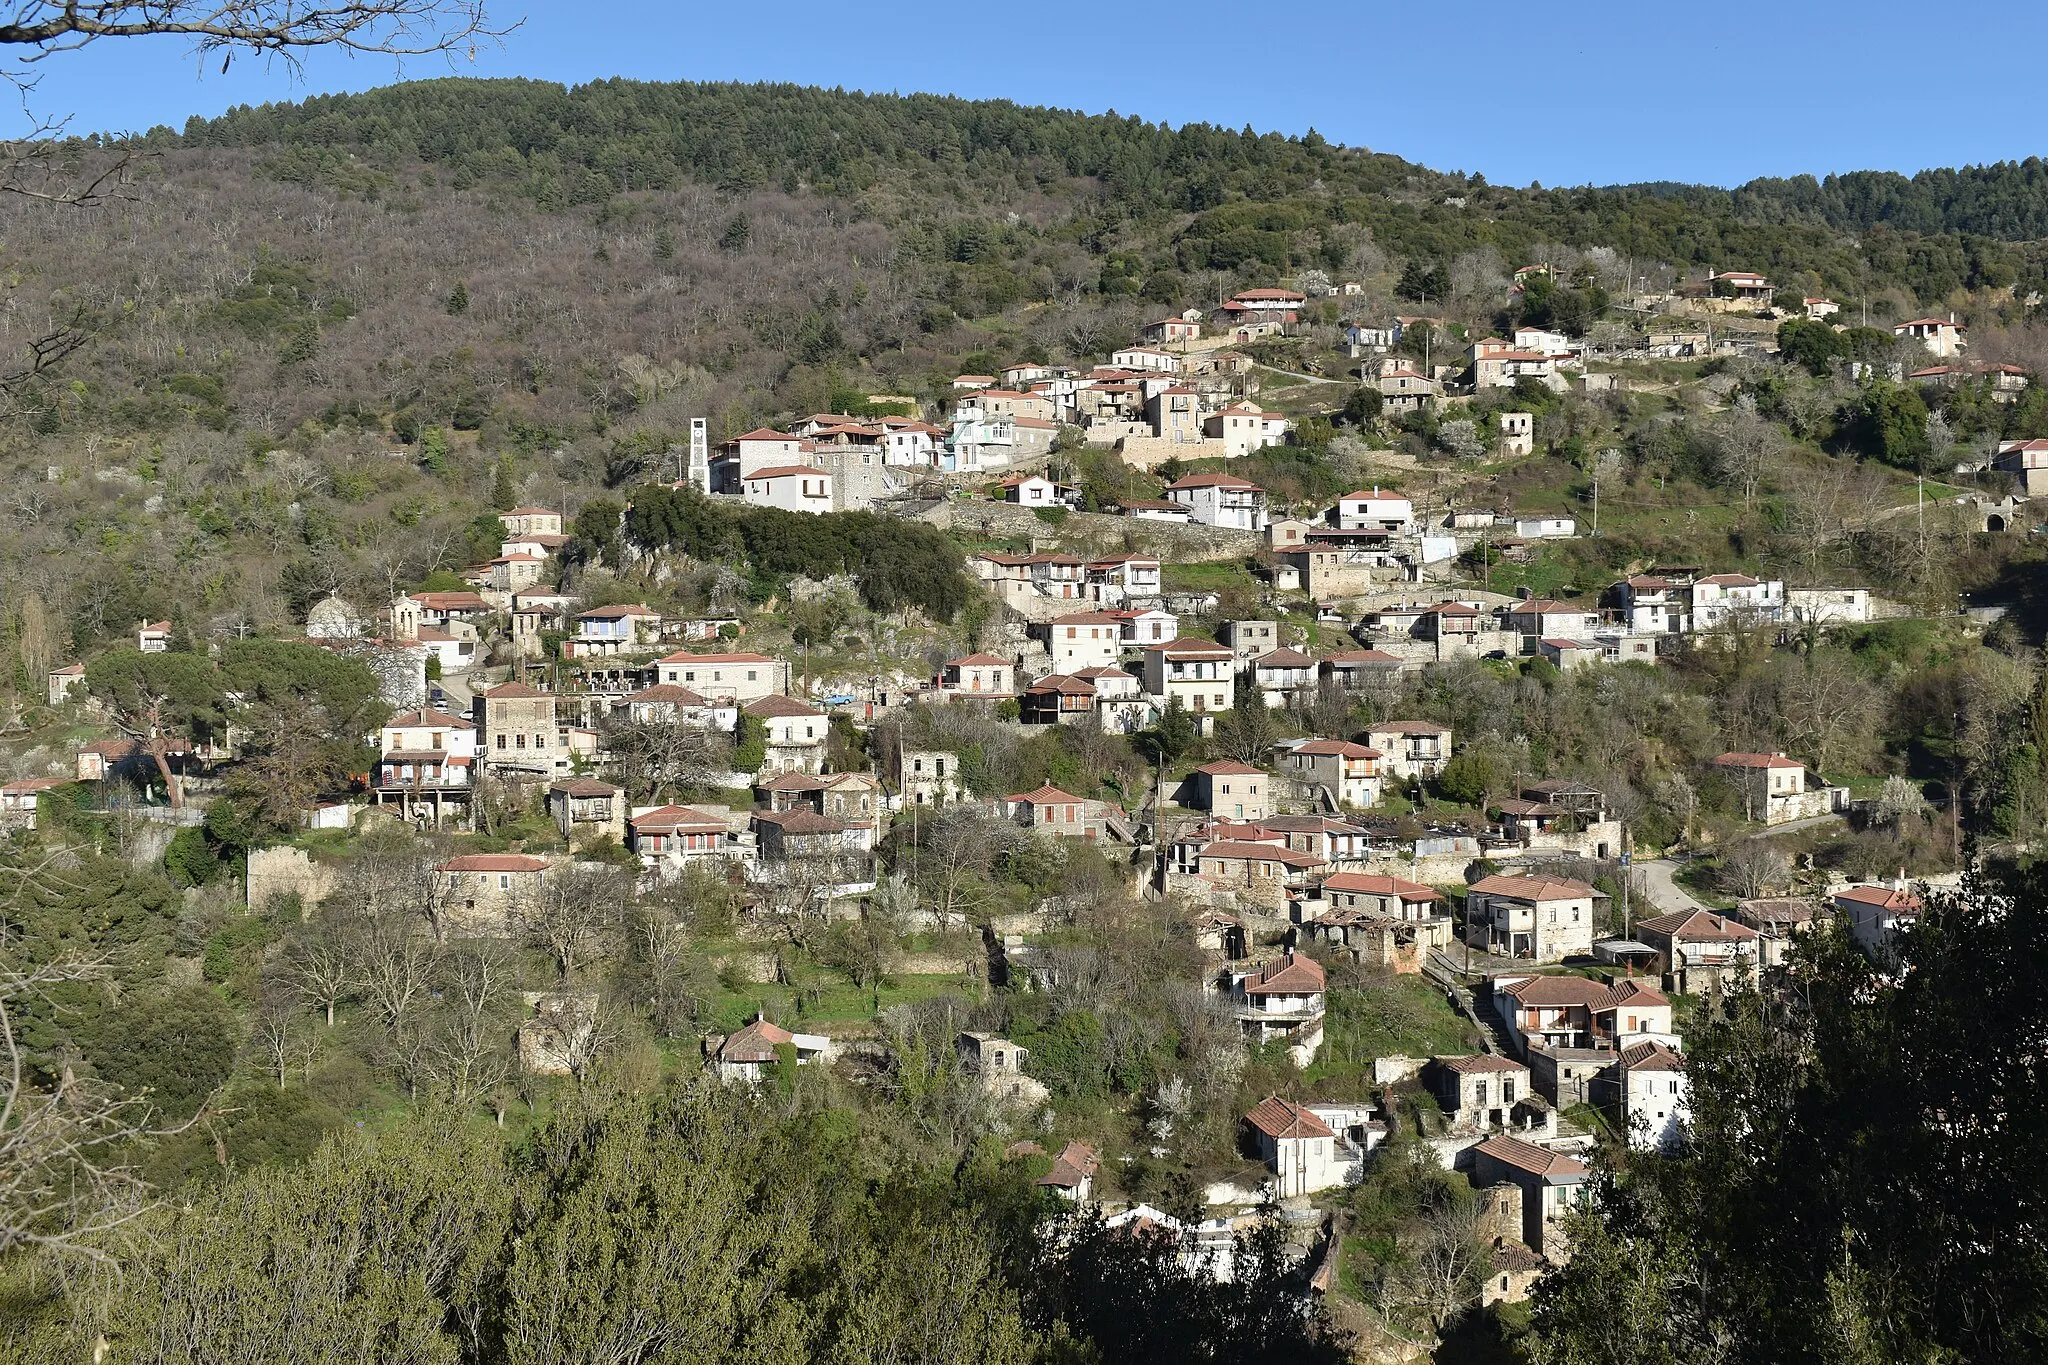 Photo showing: In the middle left the main church of the village, Agios Vasileios, can be seen. On the upper part of the image the characteristic 1950s clock is visible. Above the village looms the chestnut forest and Mount Parnon.